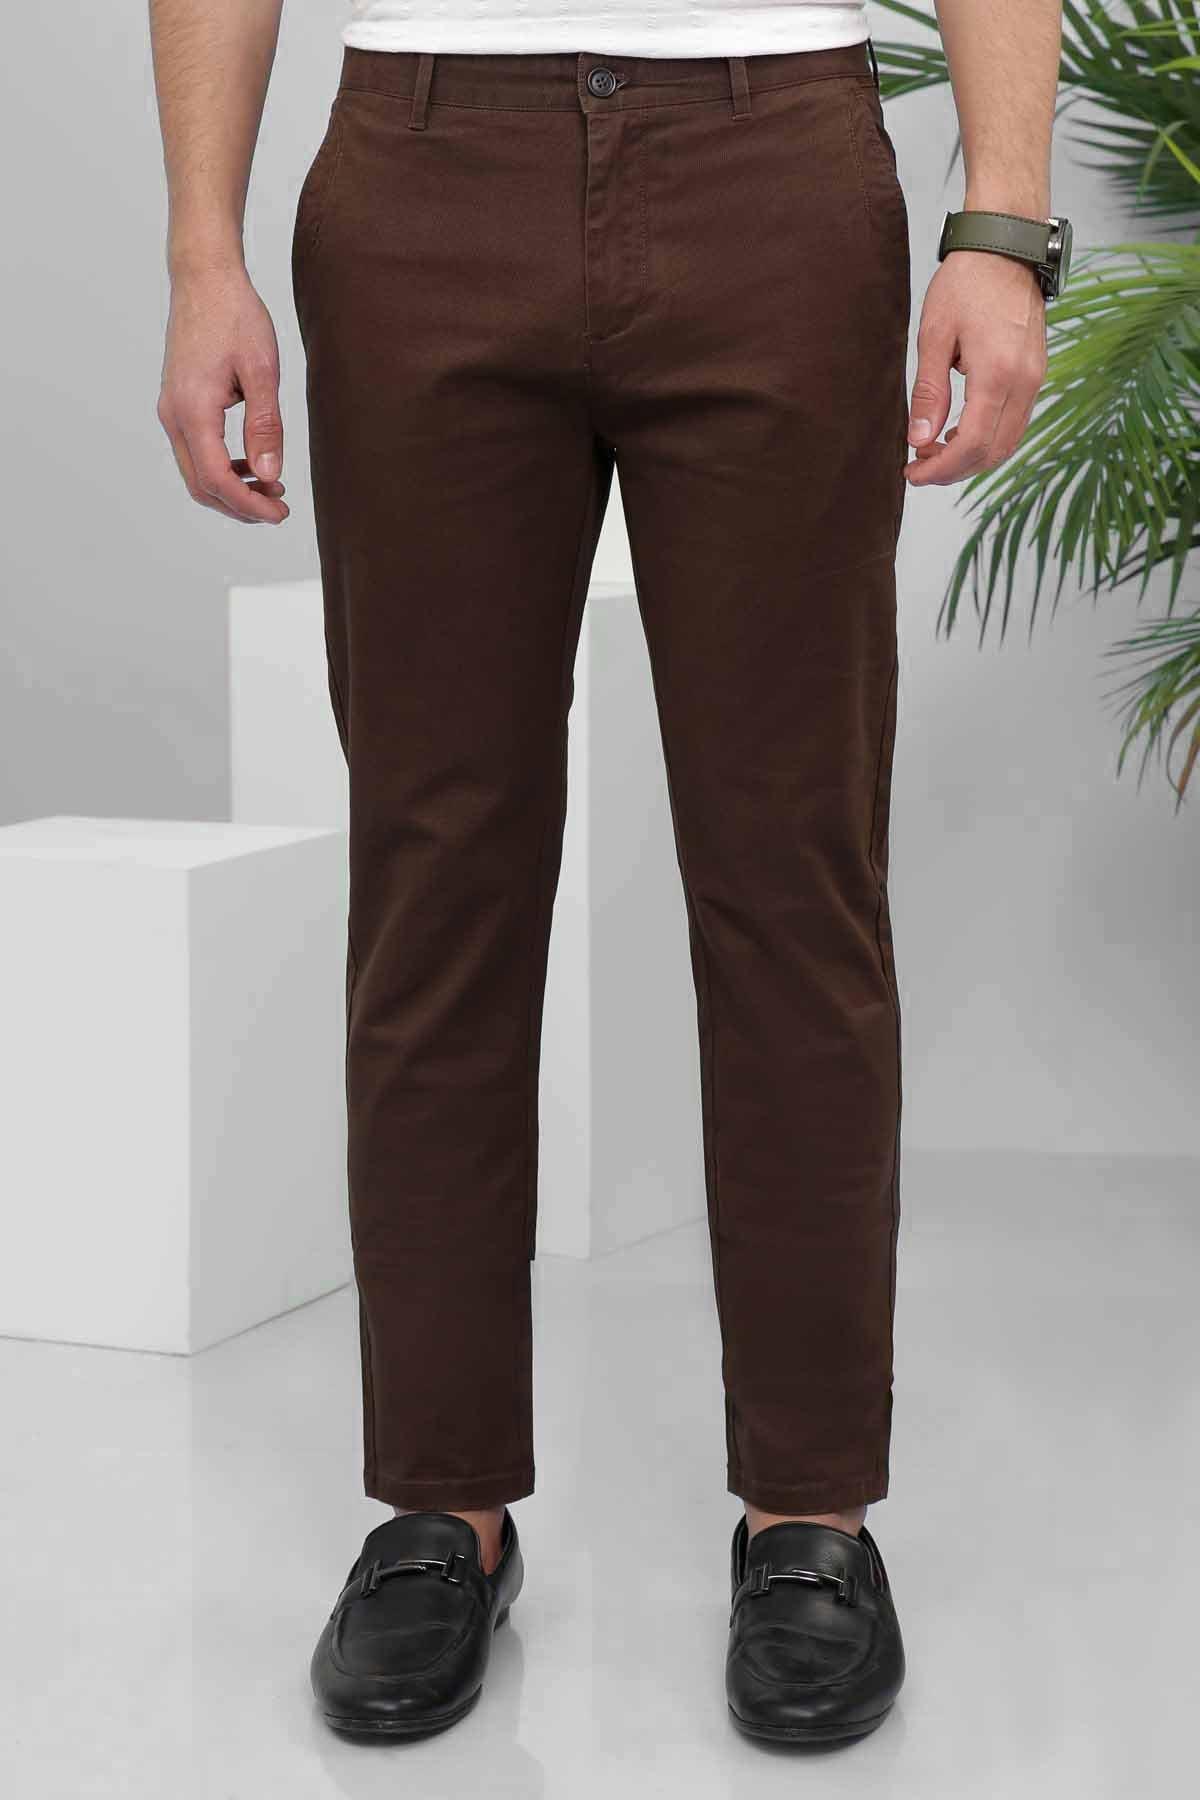 CASUAL PANT SLIM FIT BROWN at Charcoal Clothing